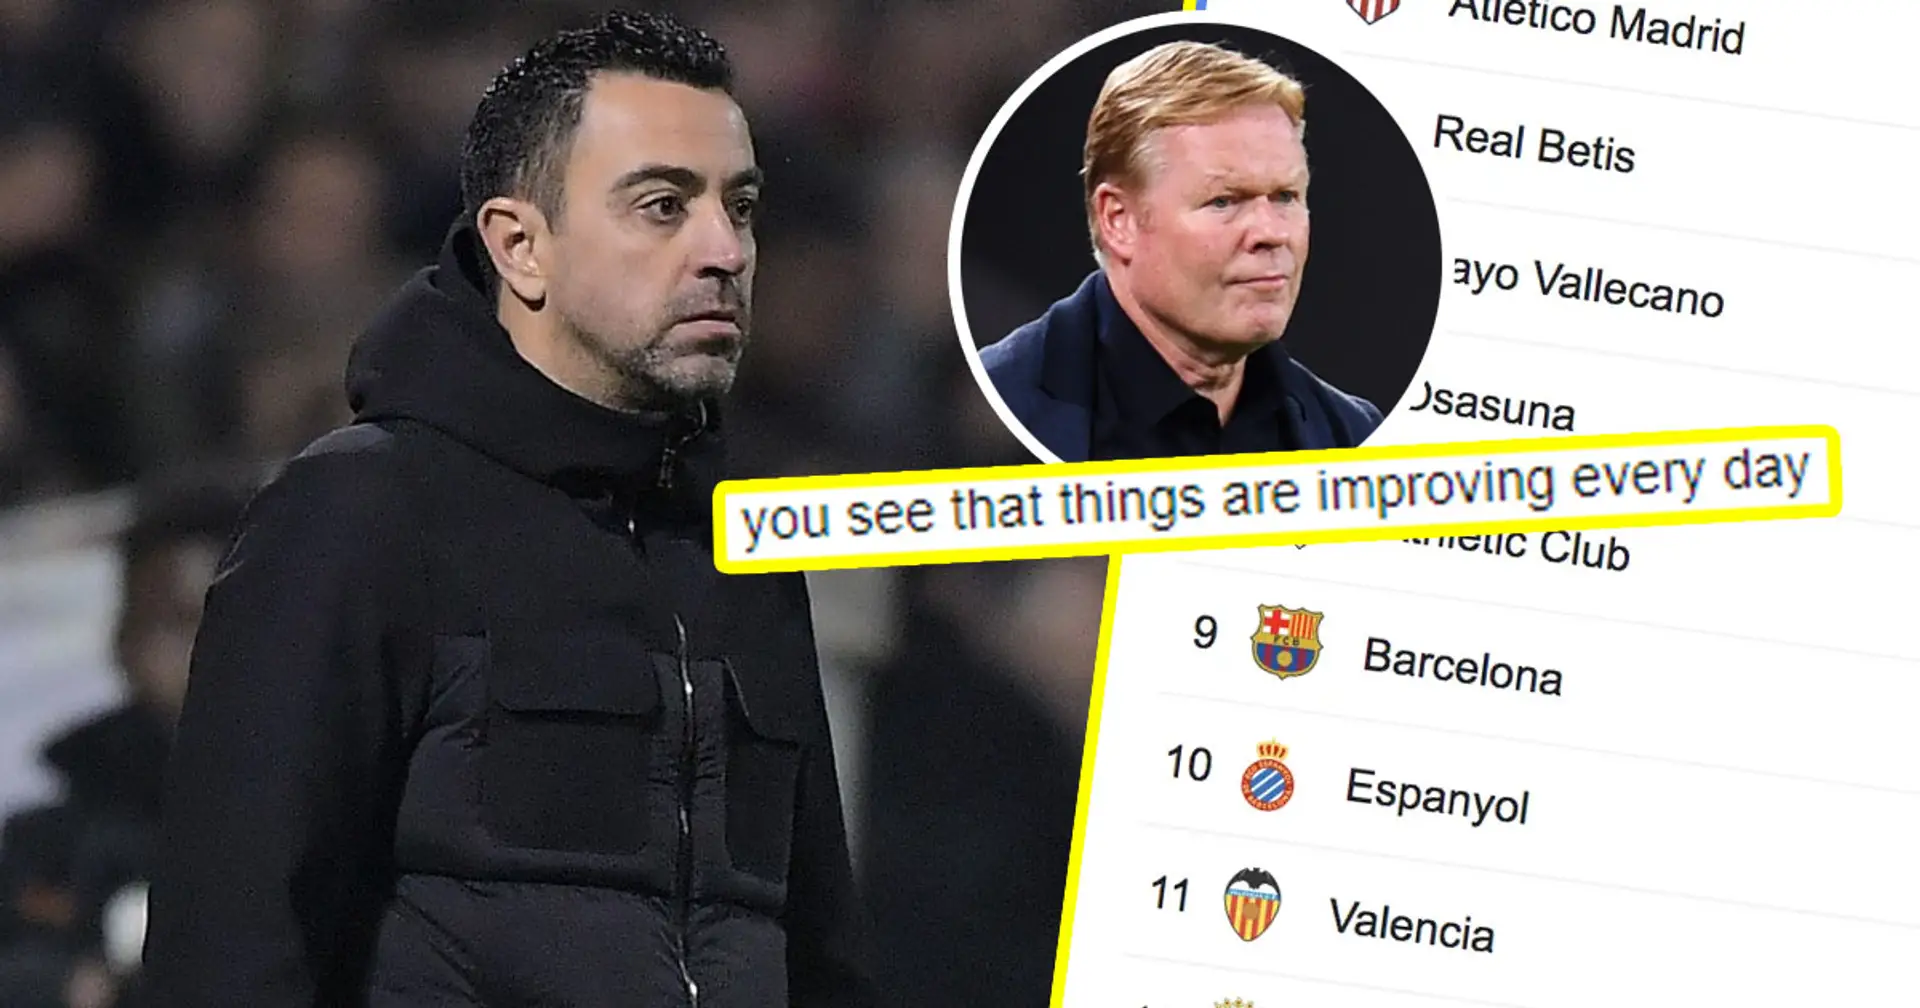 'Same level of toxicity as when we were 9th with Koeman': fan reminds cules that Xavi needs more time